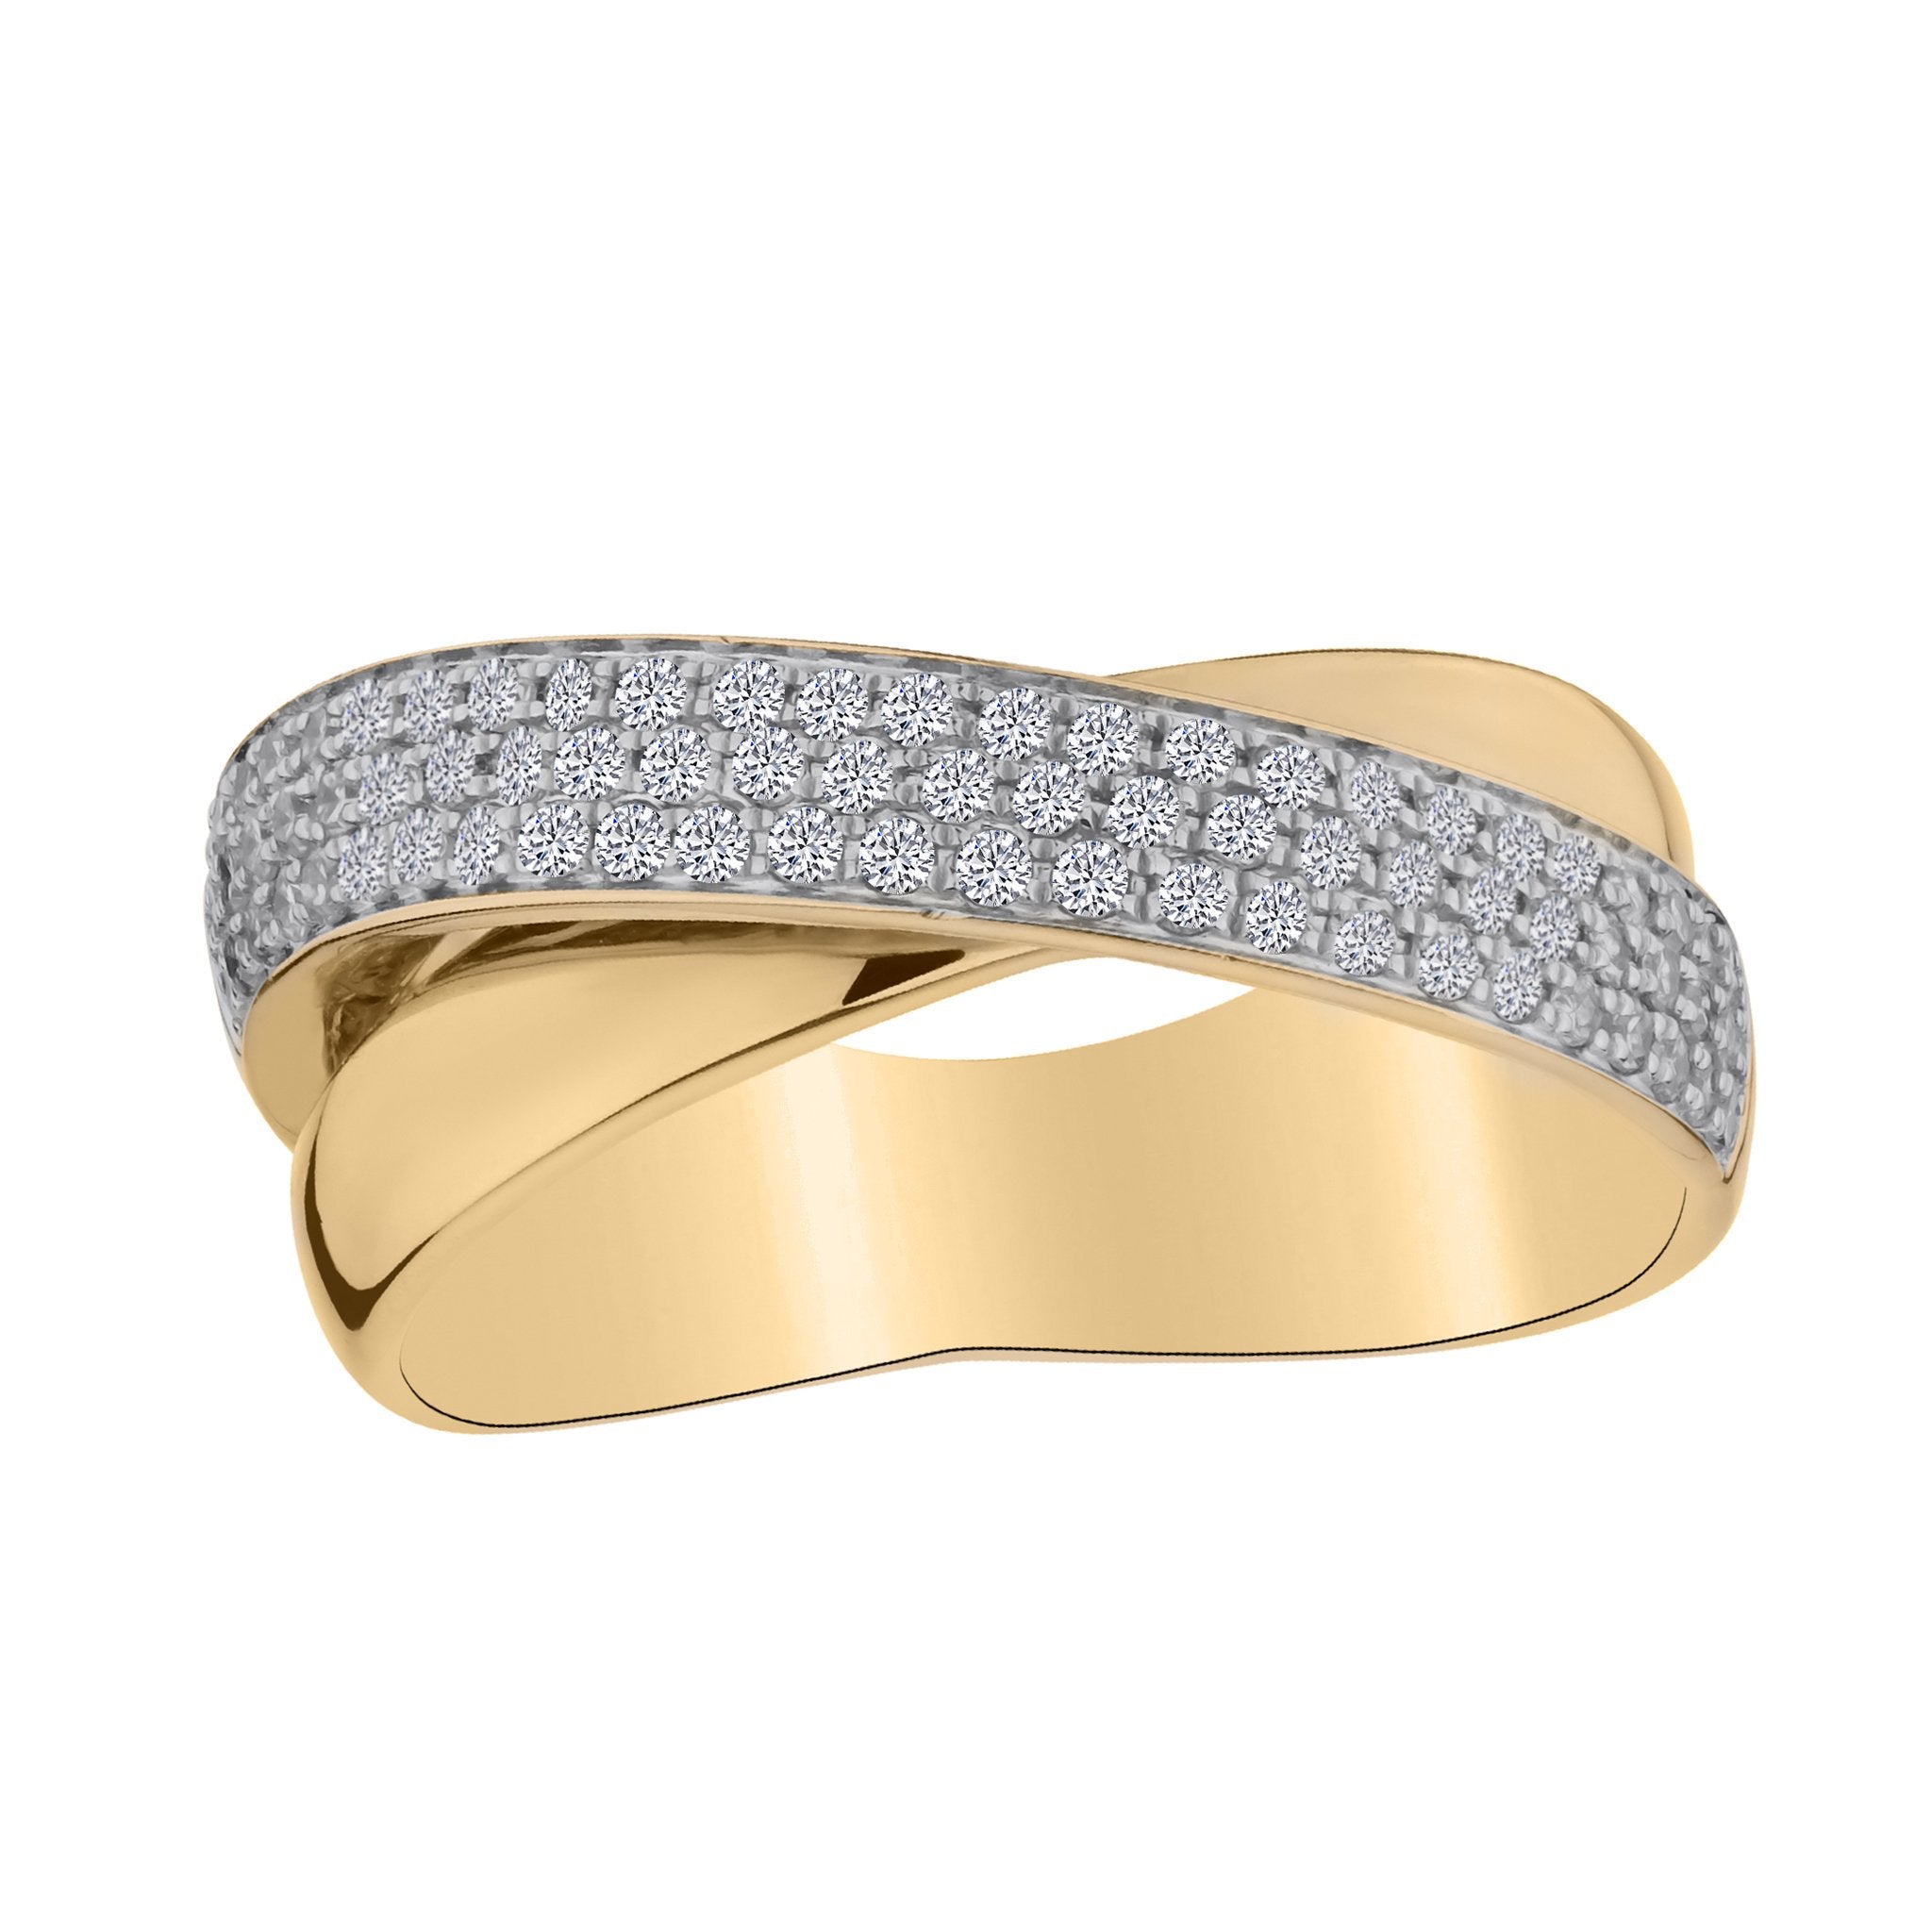 .65 CARAT DIAMOND RING, 14kt YELLOW GOLD.....................NOW - Griffin Jewellery Designs